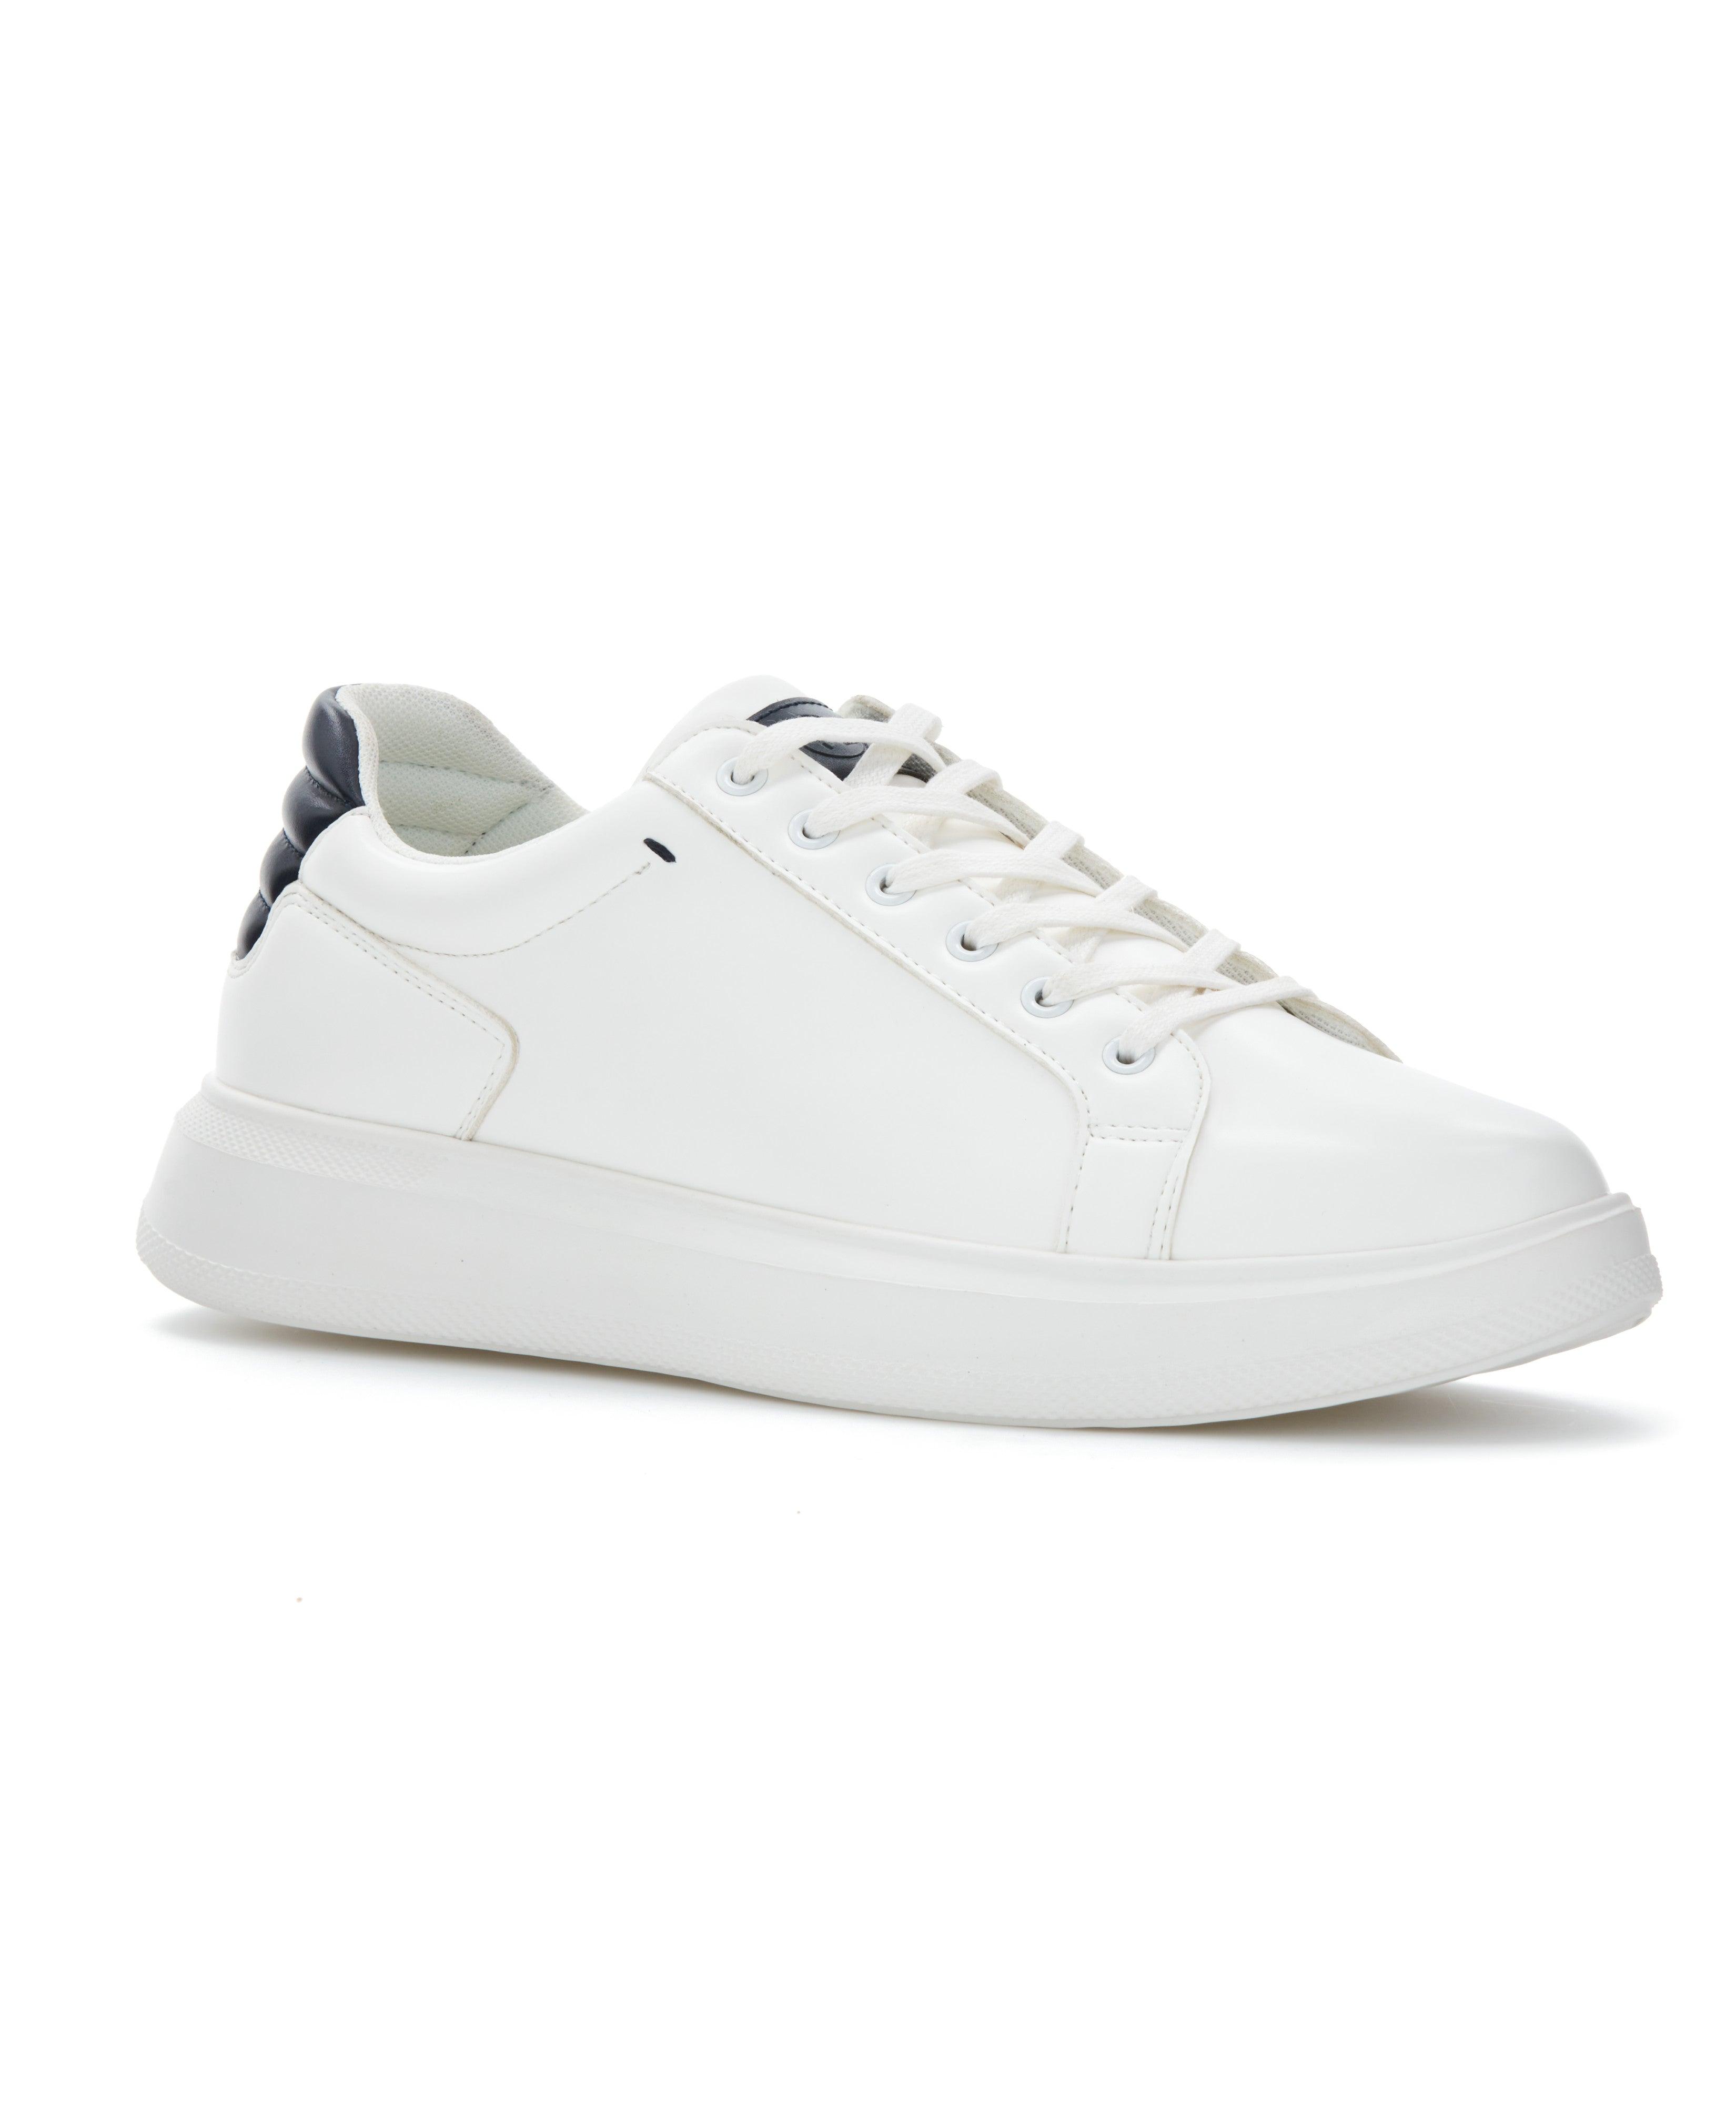 ASOS DESIGN Wide Fit Divine chunky sneakers in white | ASOS